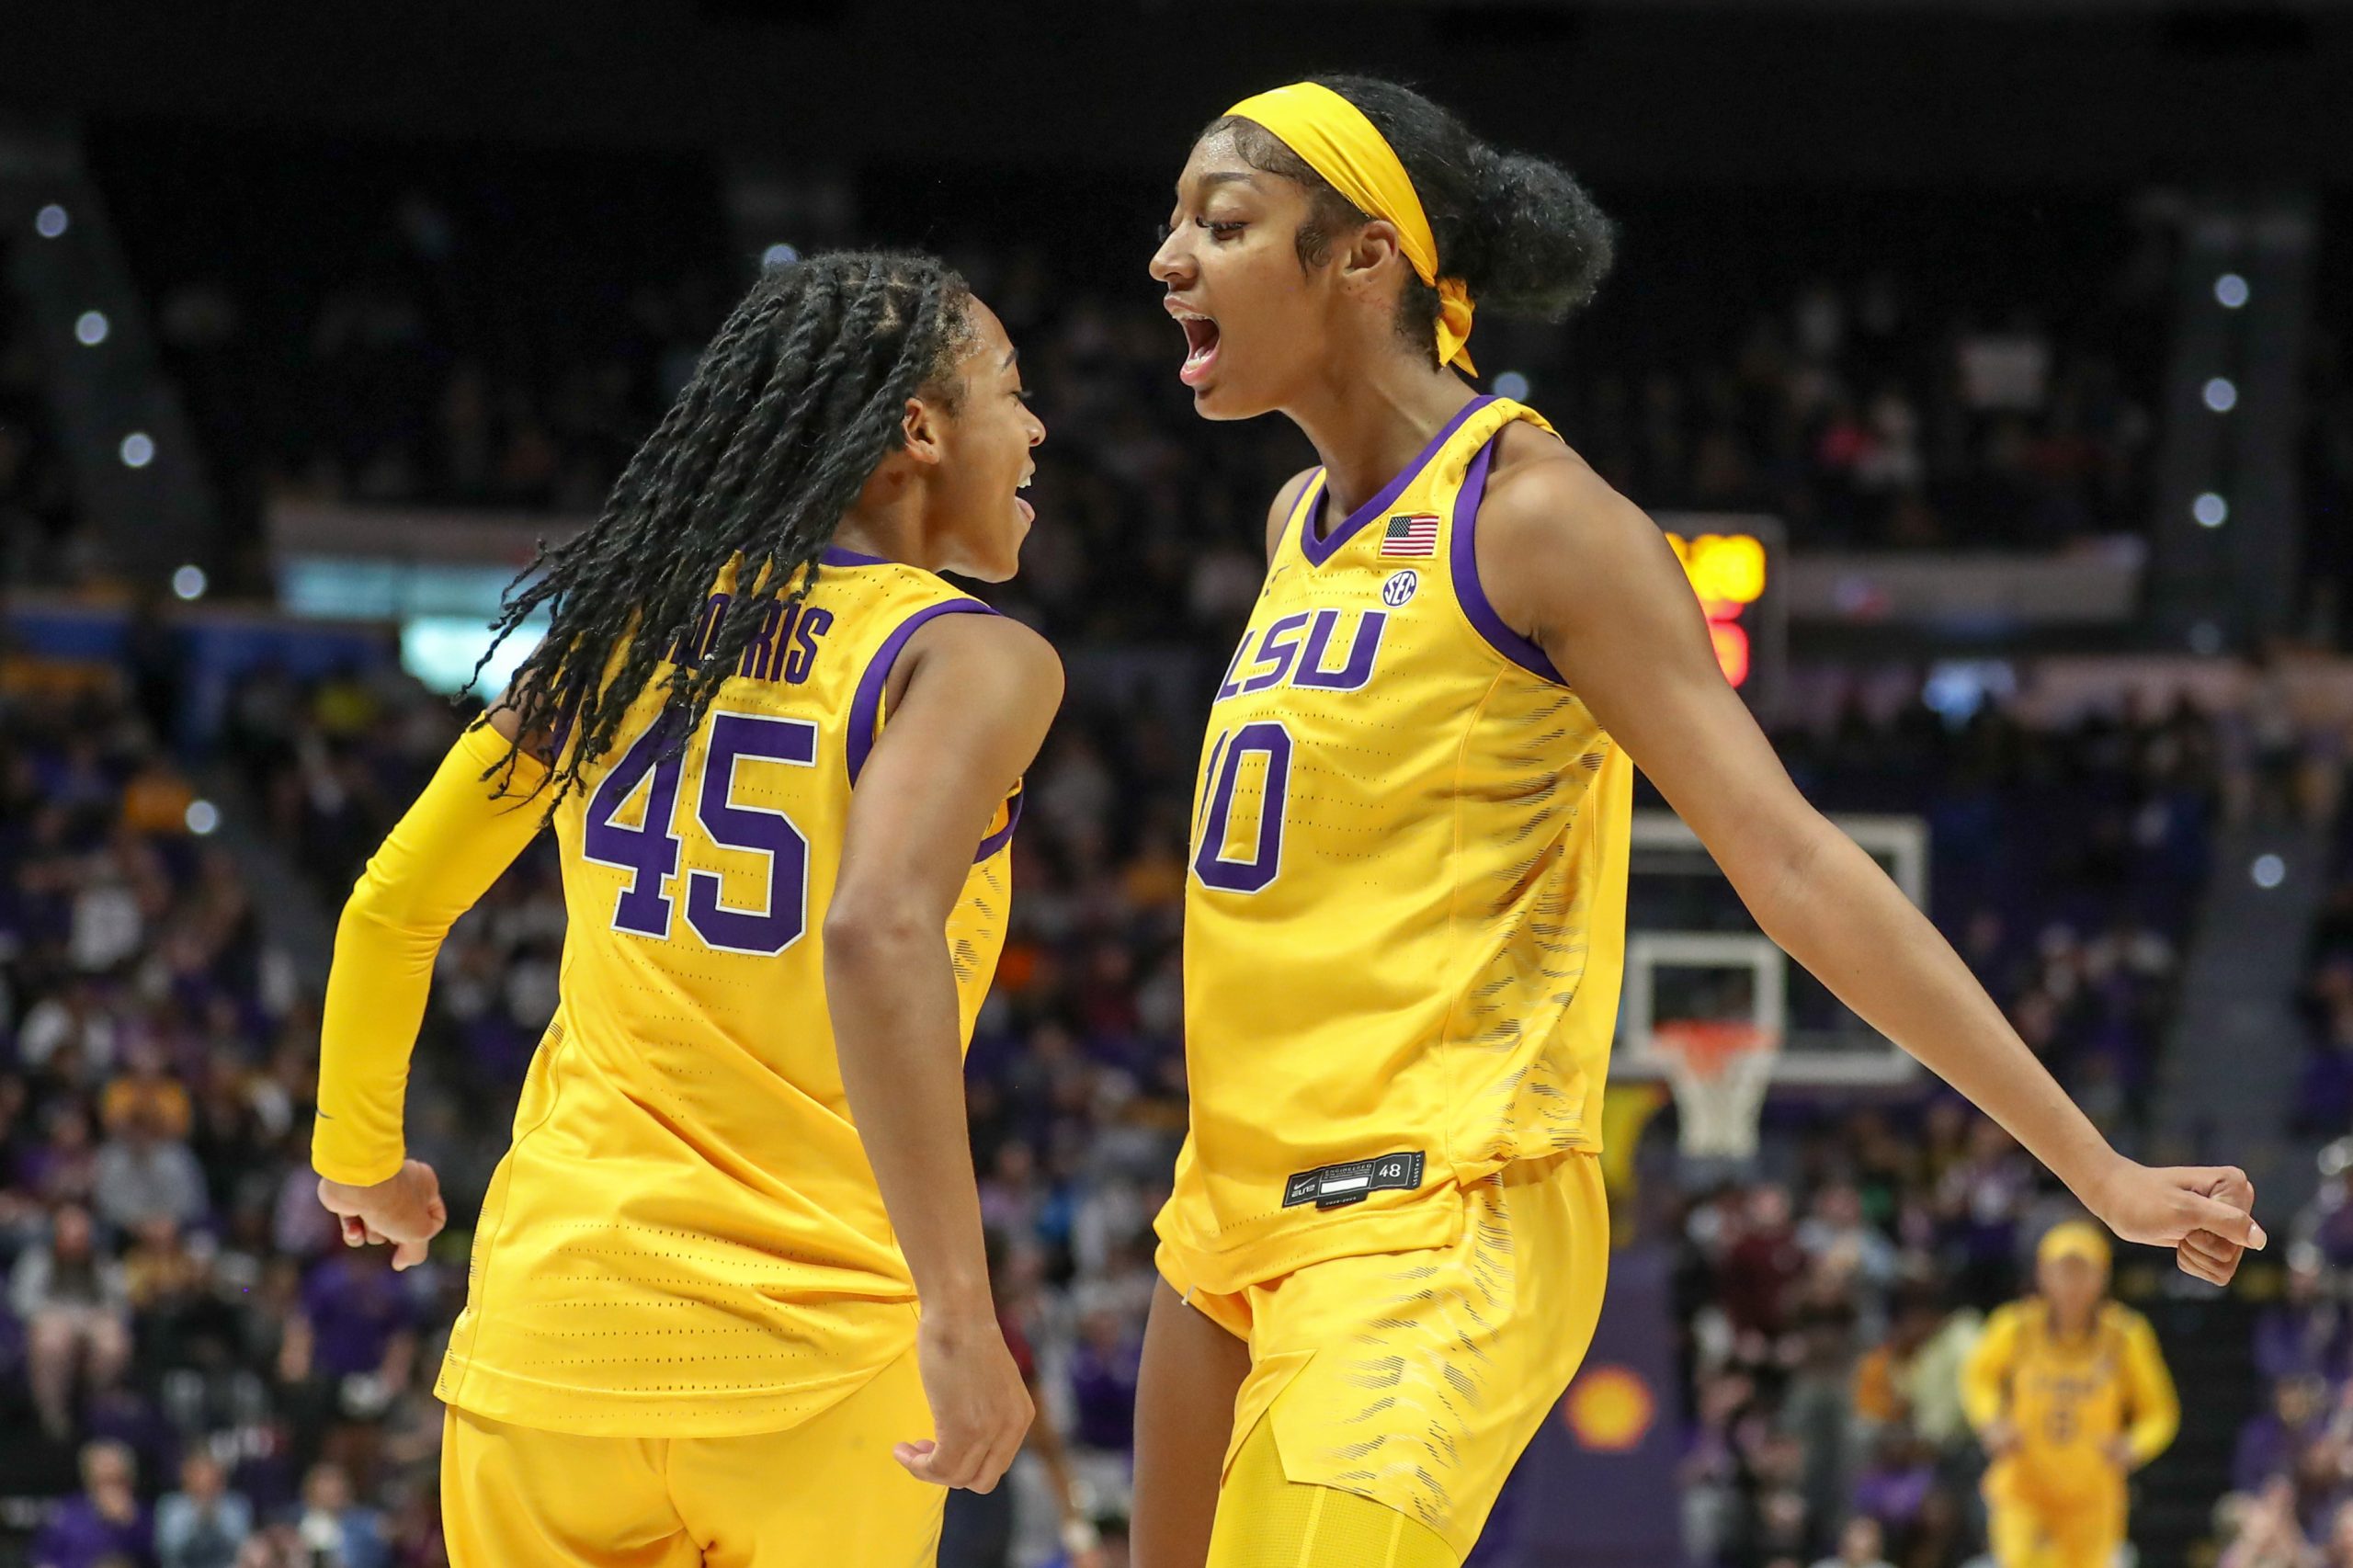 No Lsu Hosts Arkansas With Star Forward Angel Reese In Pursuit Of A